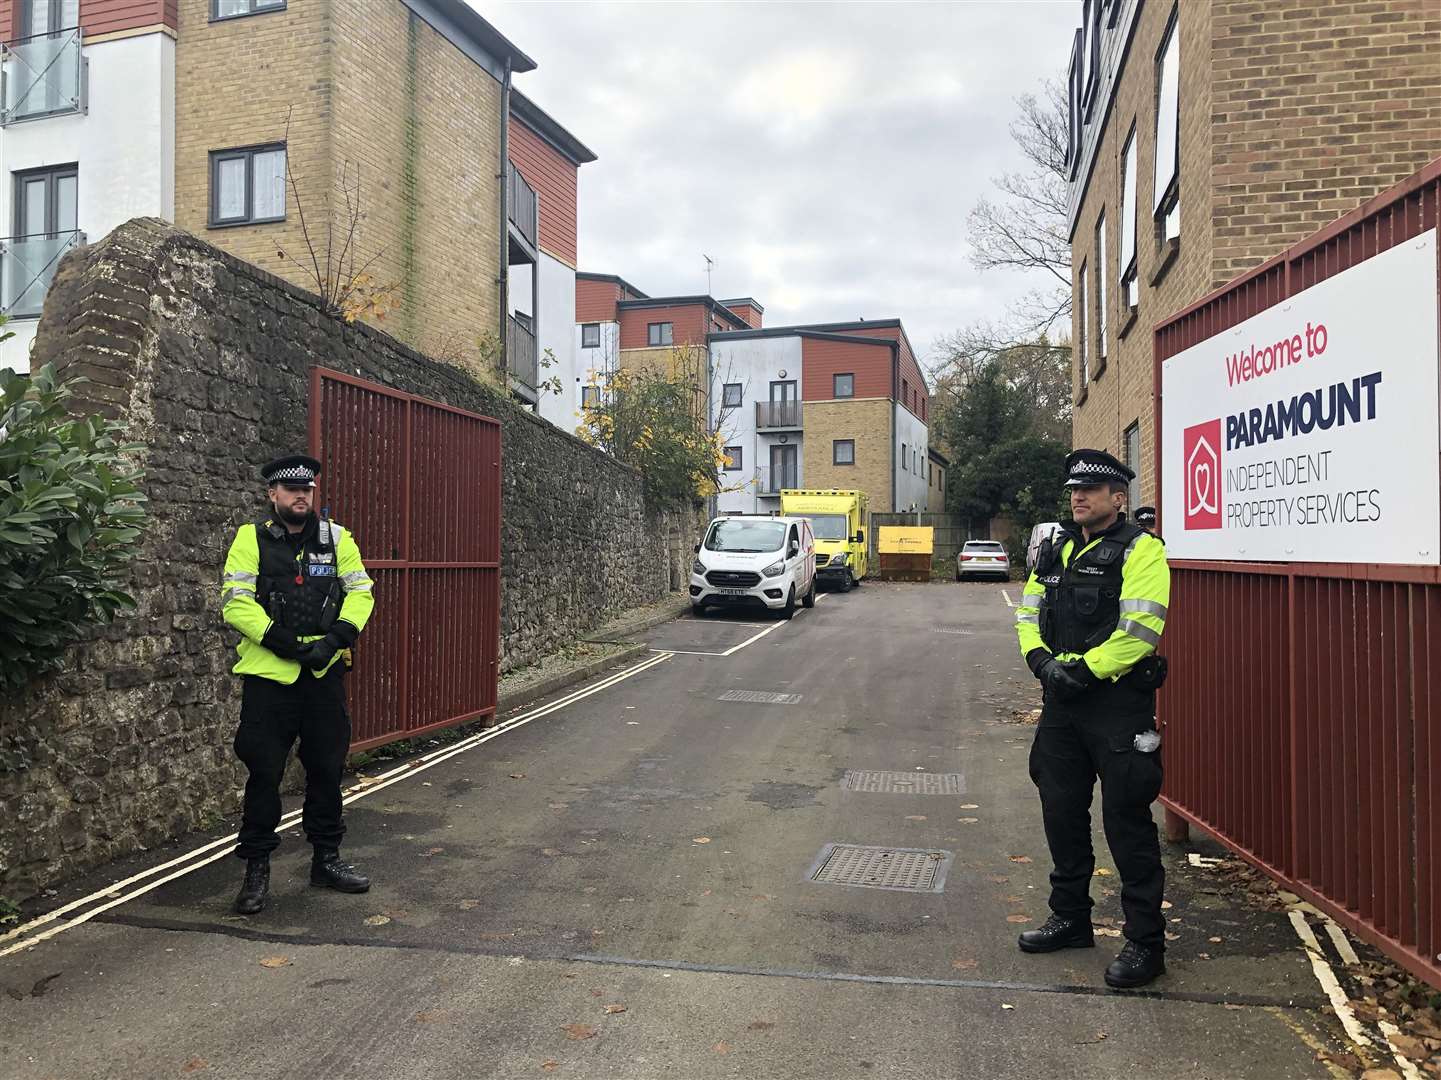 Police stand at the entrance to Chaucer House, Knightrider Street, Maidstone, during a visit from the jury in November